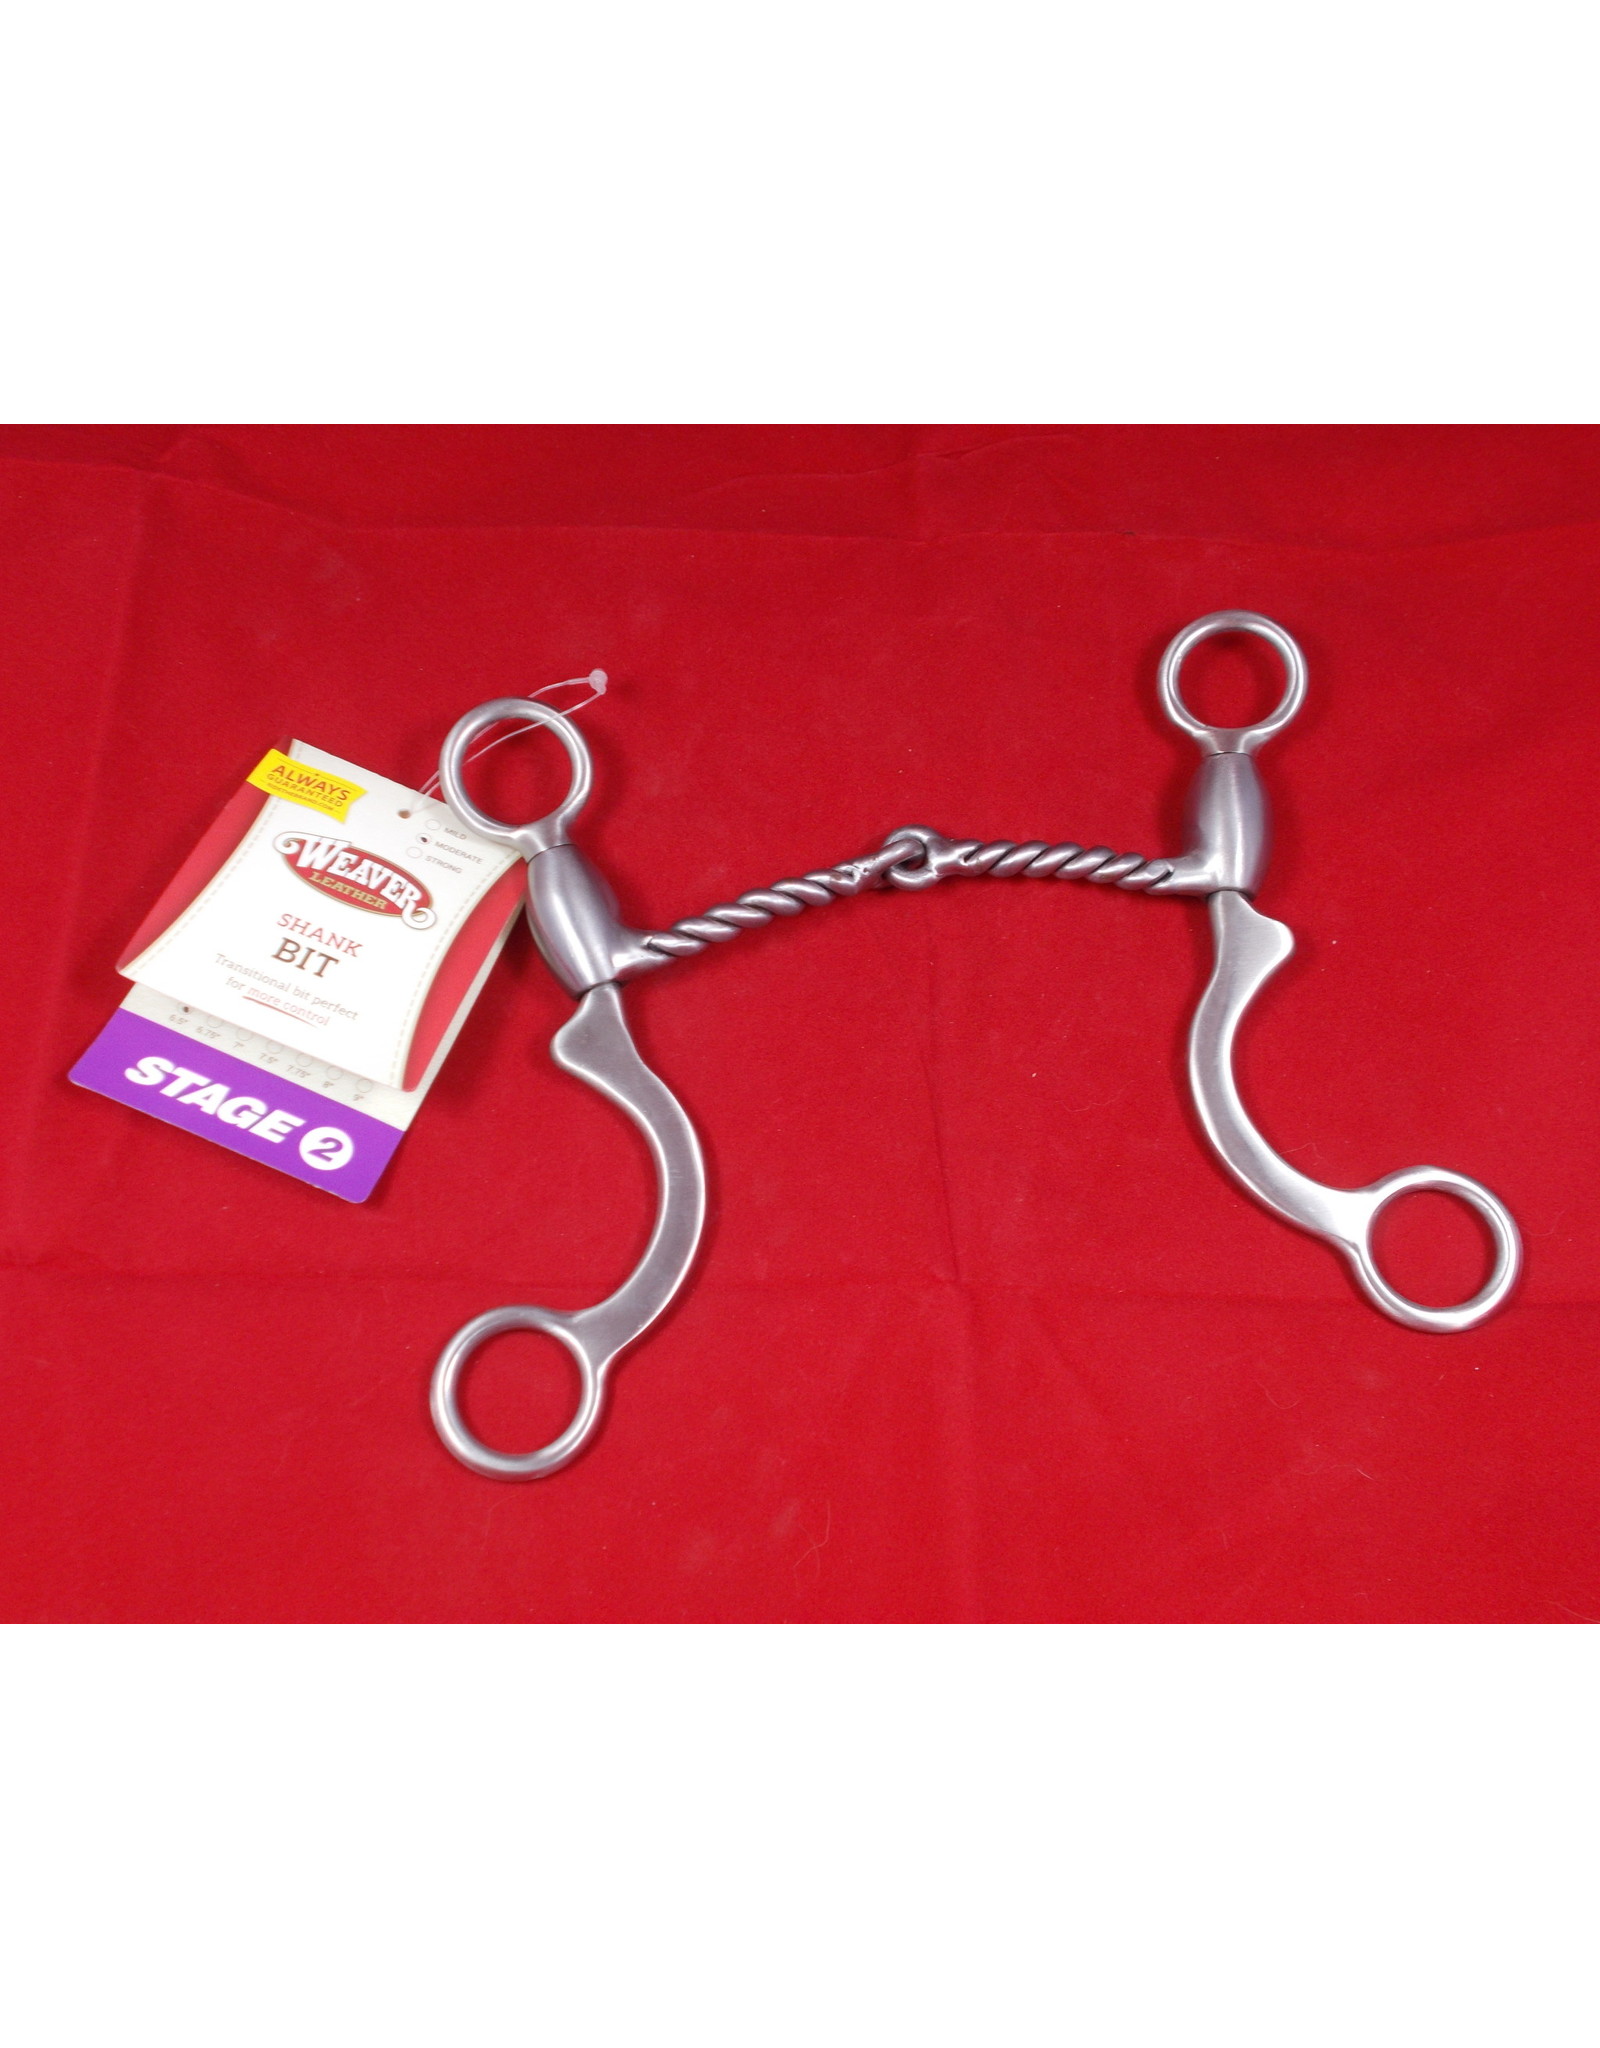 BIT* Shank Moderate Stage 2  S-Shank Twisted Wire 25-0016